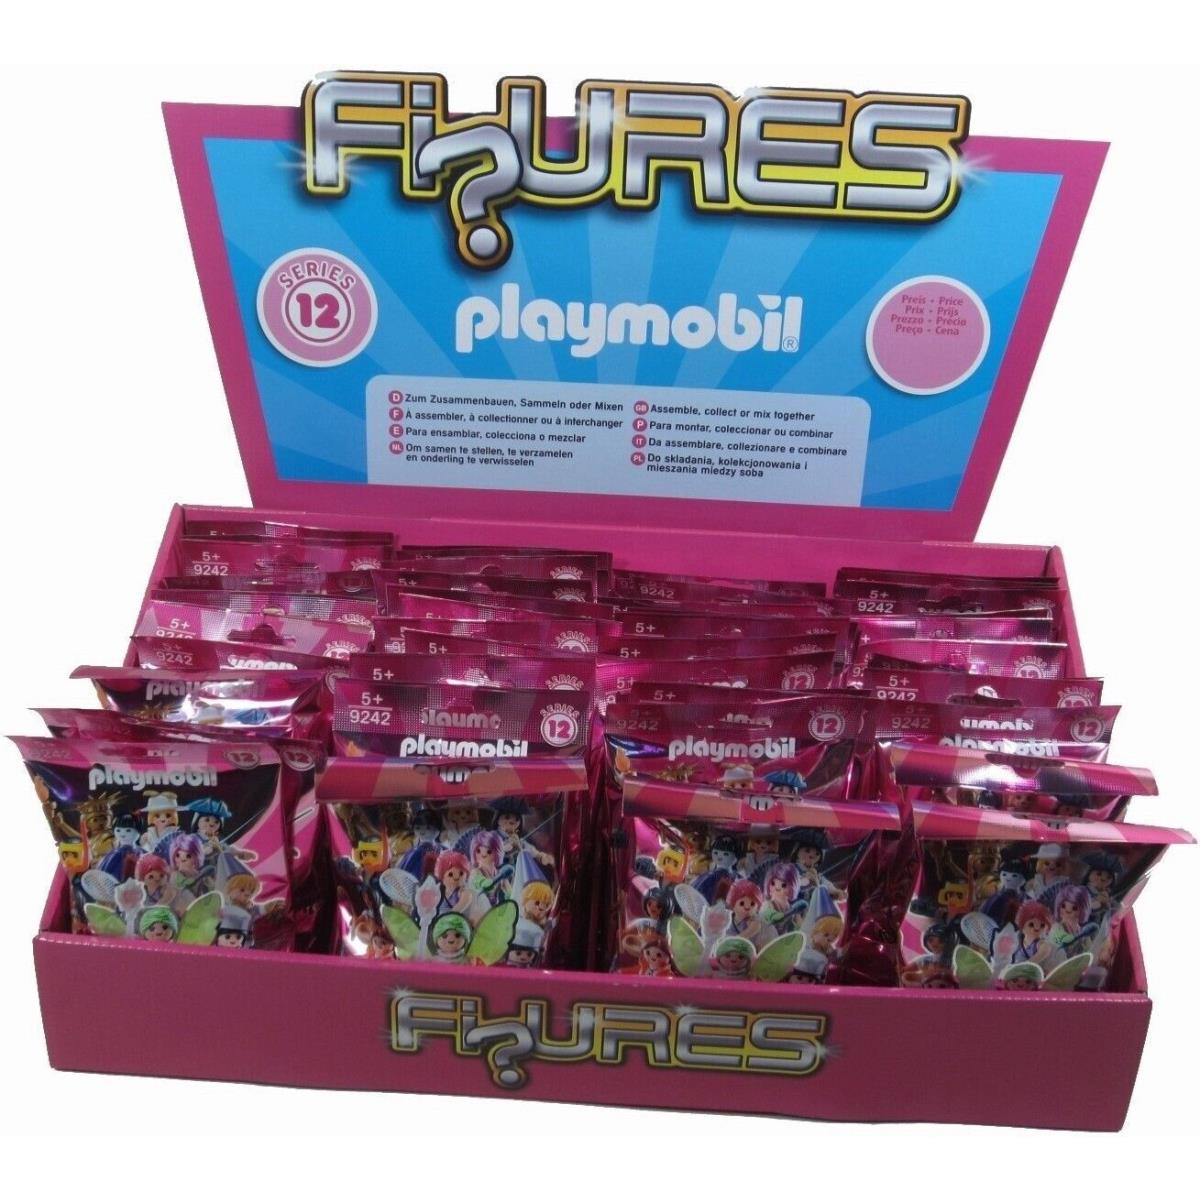 Playmobil 9242 Pink Girls Series 12 Mini Figure Case of 48 Mystery Blind Bags